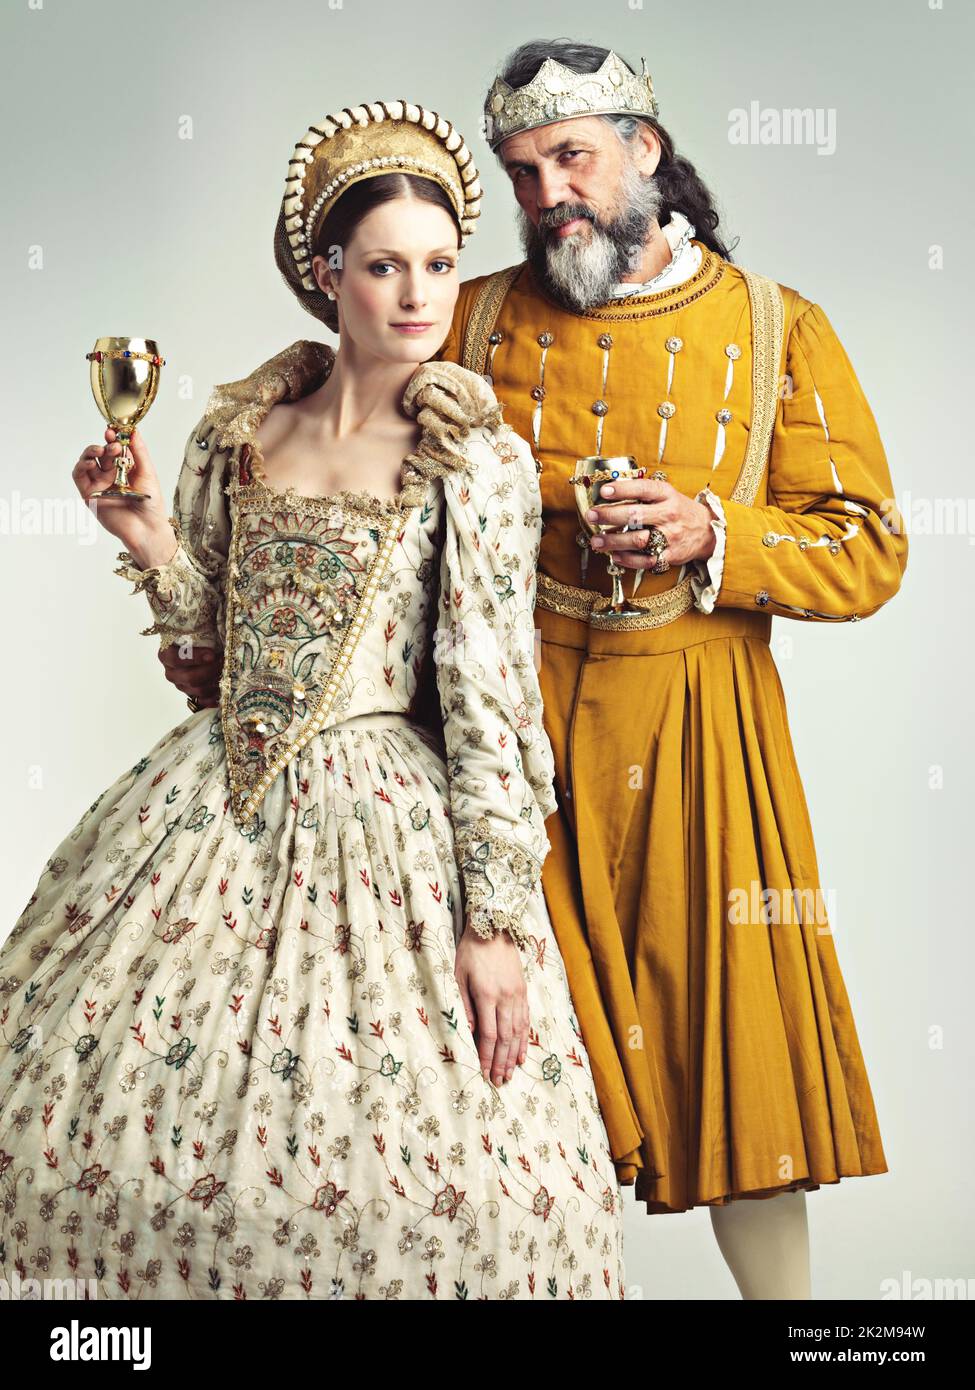 This is how we royals roll. Studio portrait of a king and queen drinking out of goblets. Stock Photo